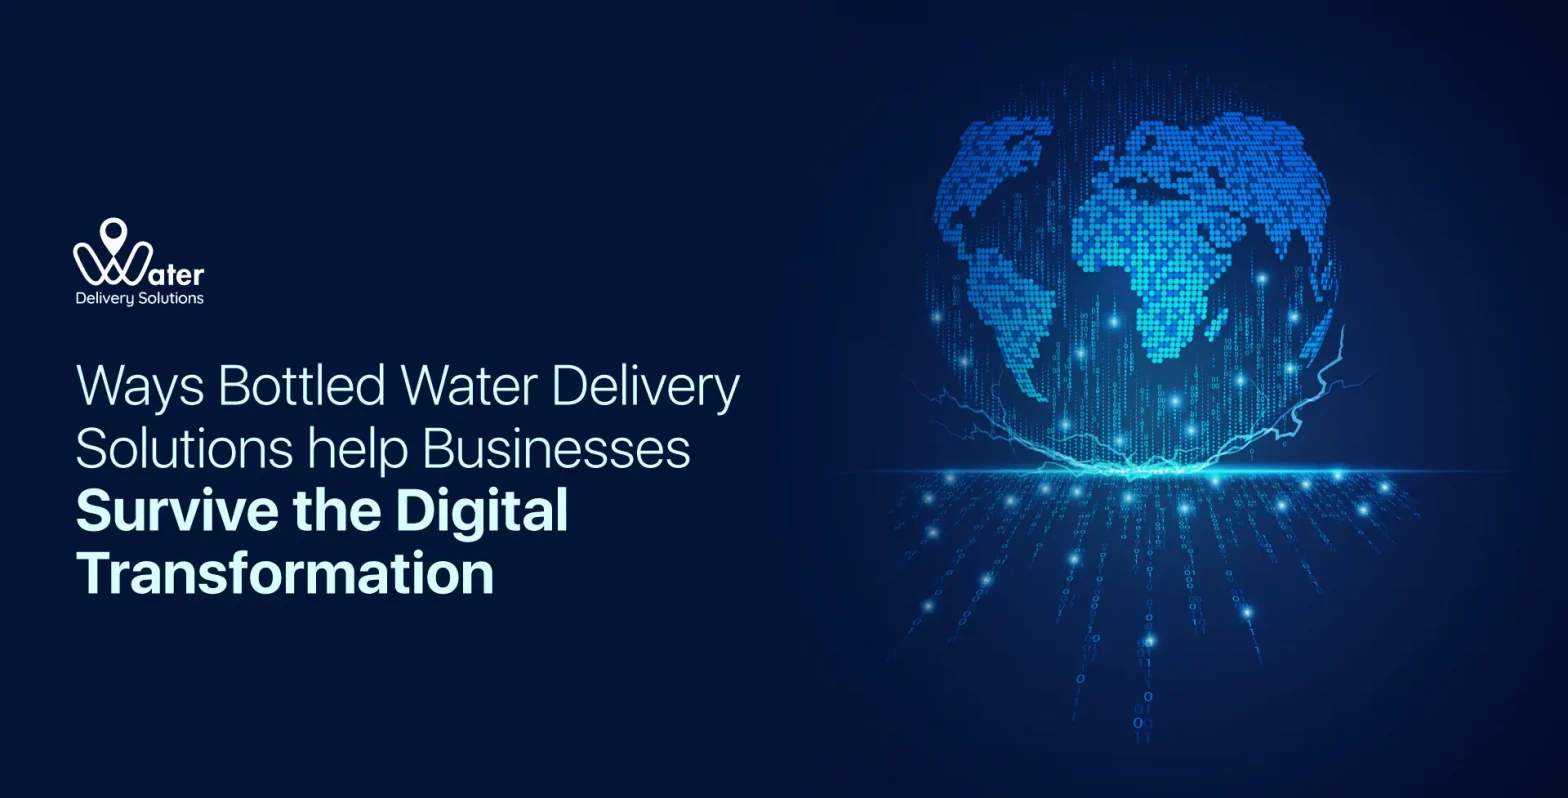 ravi garg, wds, water delivery, business, delivery software, bottled water delivery